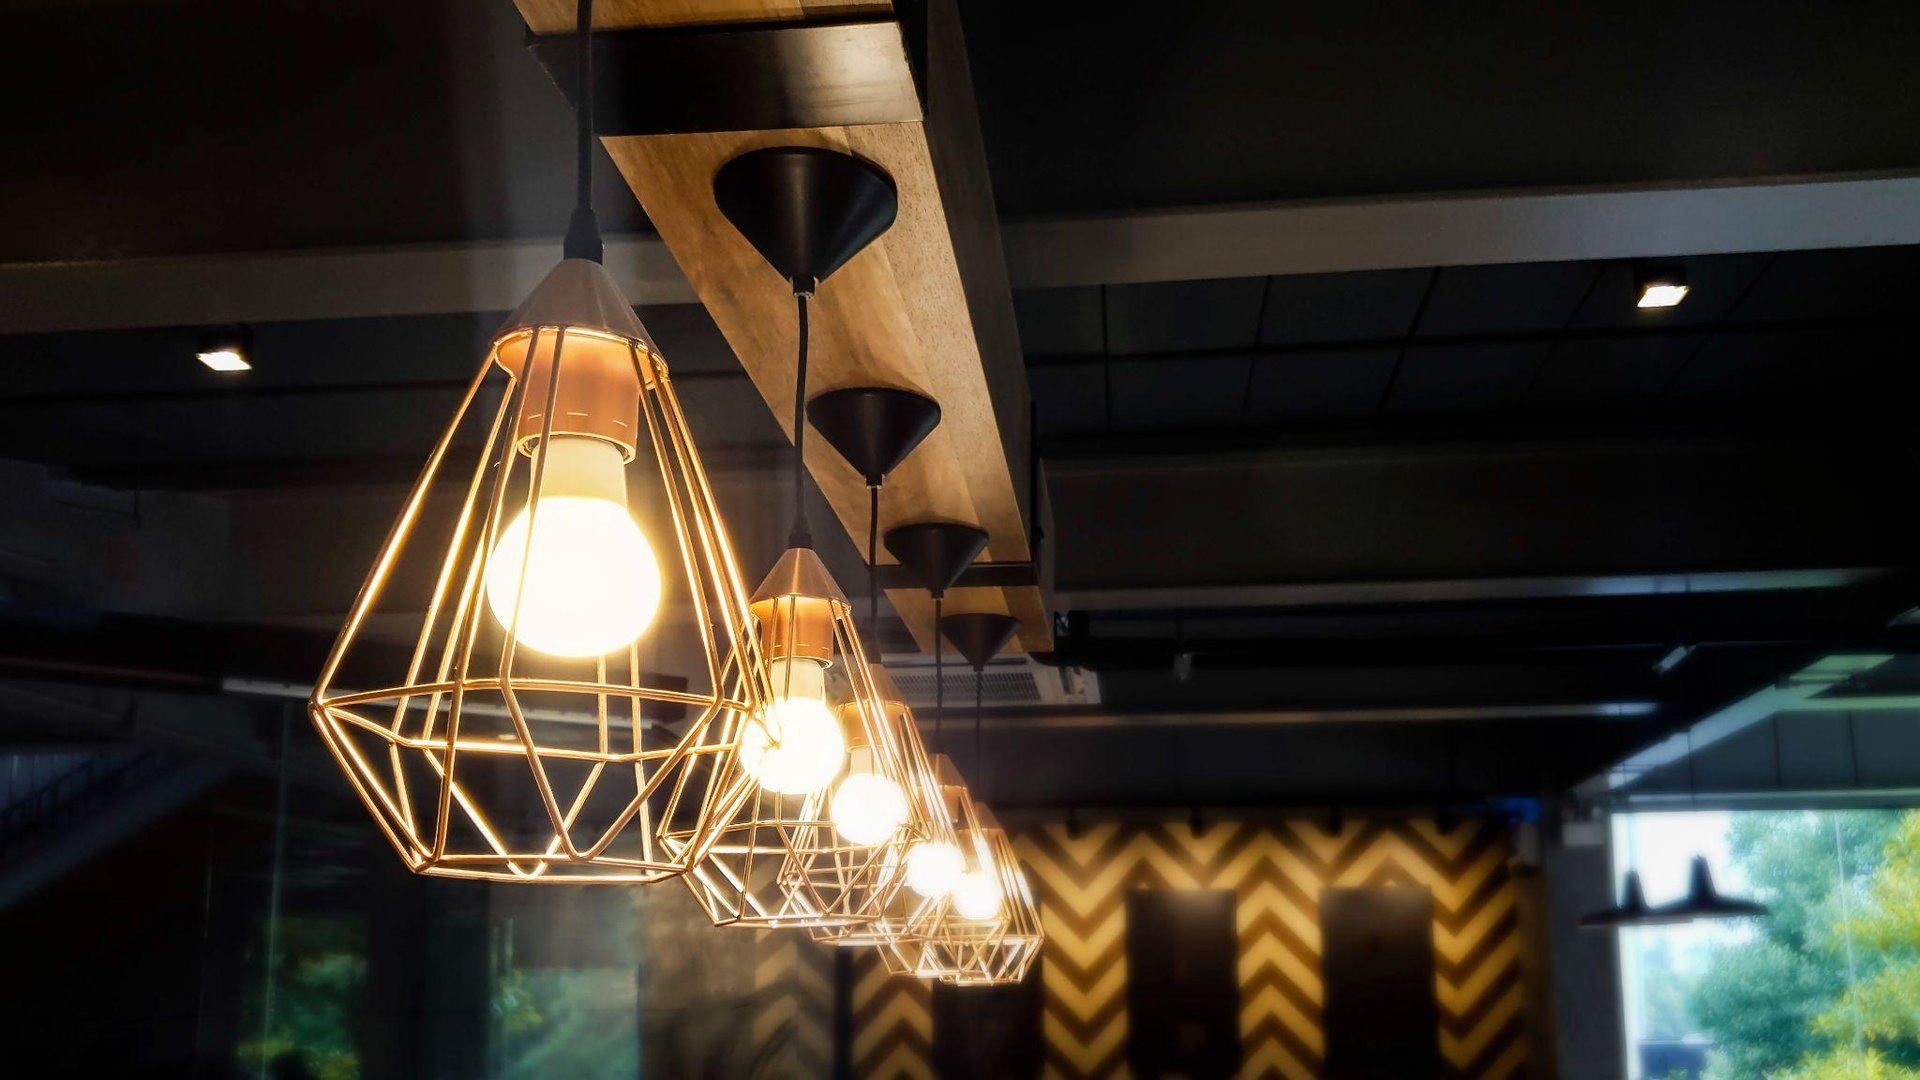 The antique retro interior design of electric light bulb décor hanging on the ceiling in a dark restaurant.